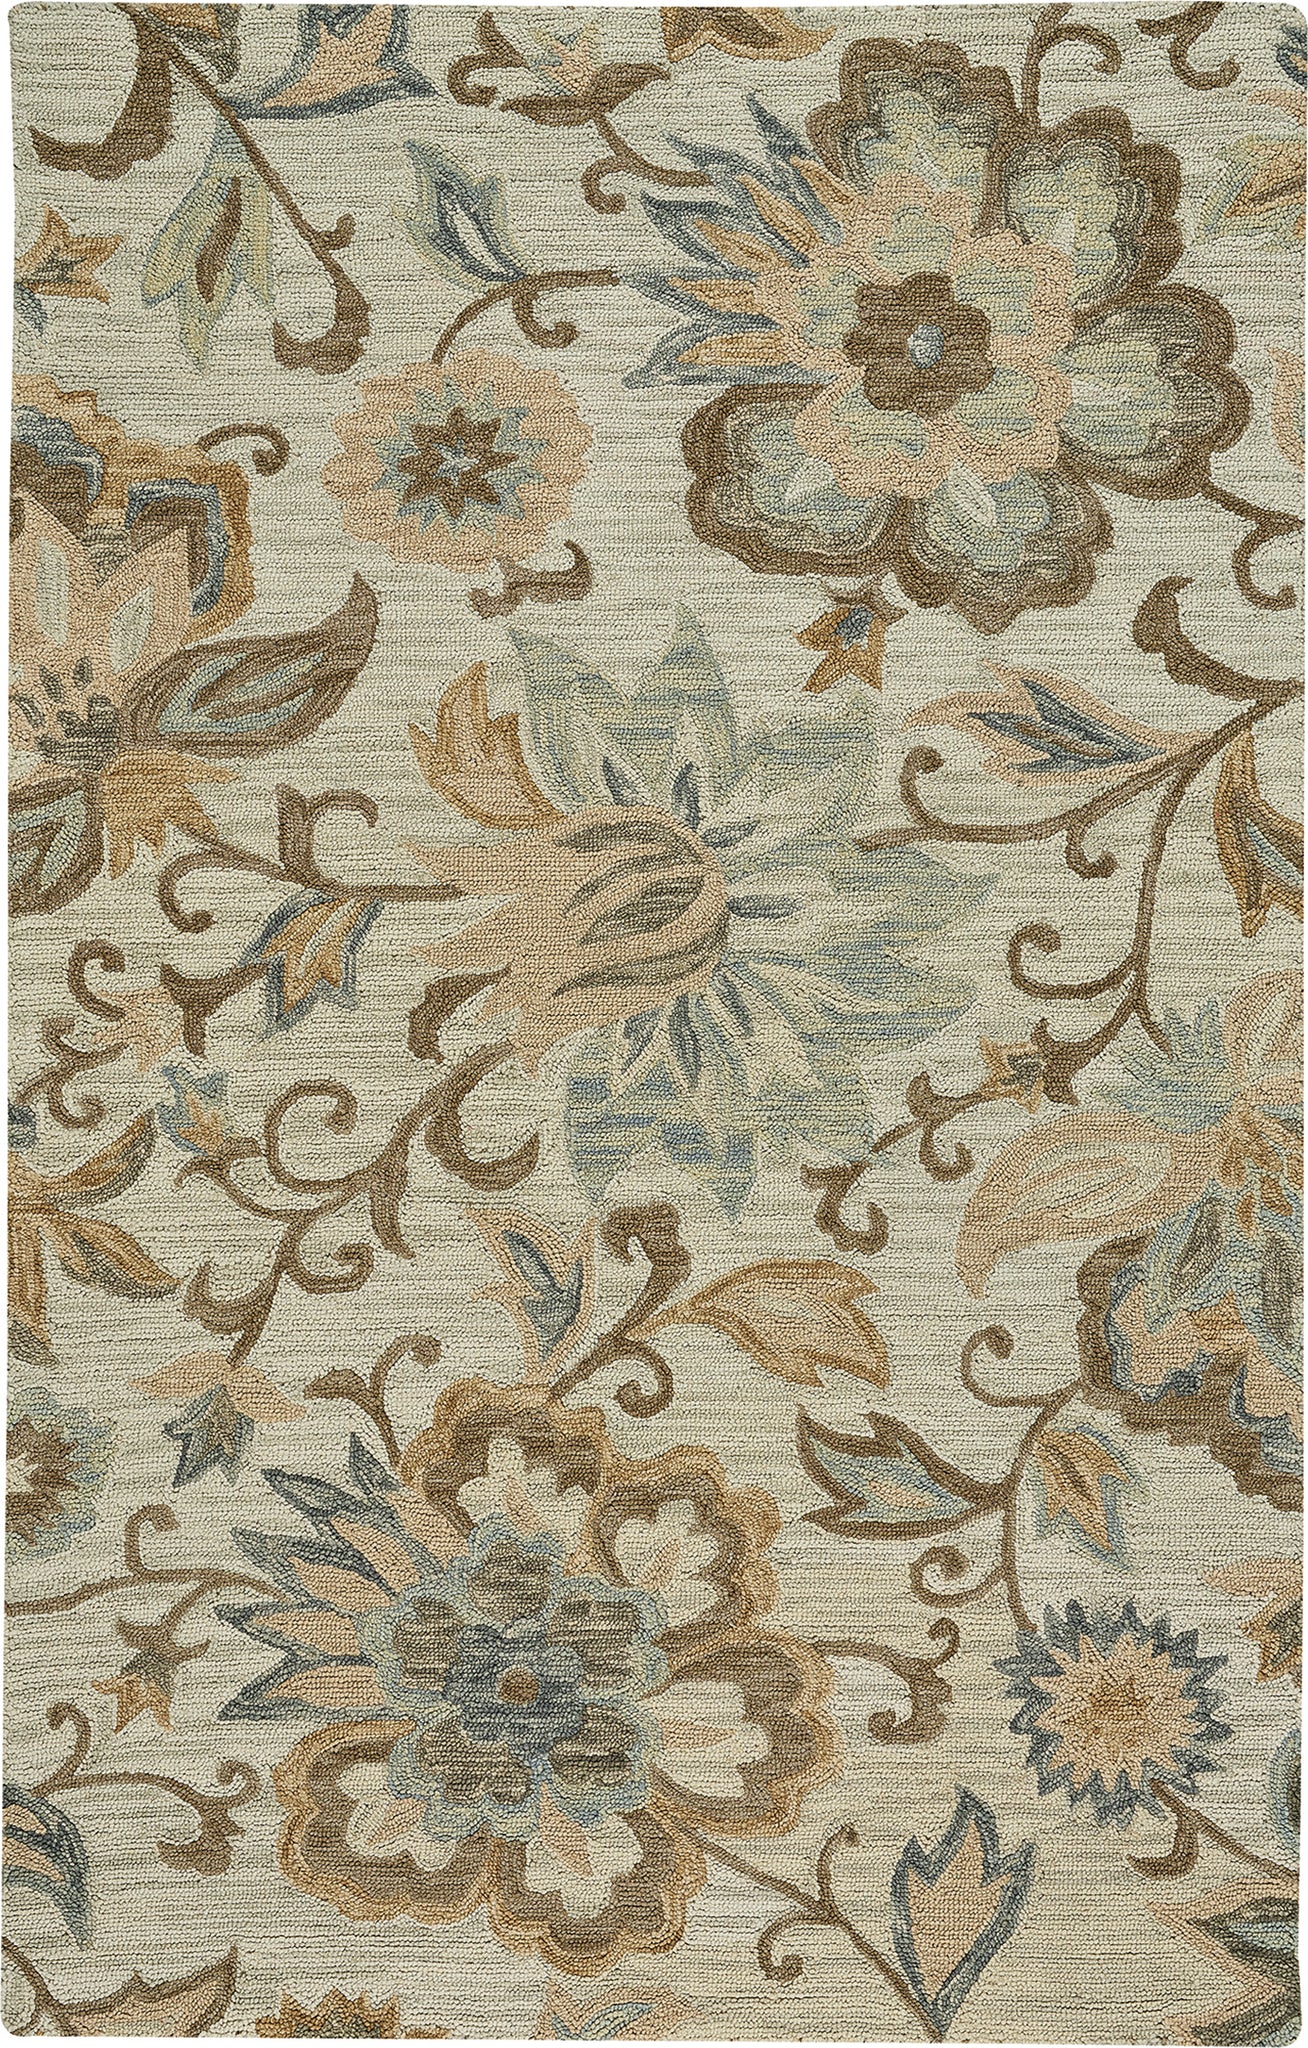 Capel Lincoln 2580 Blooming Multi Area Rug main image